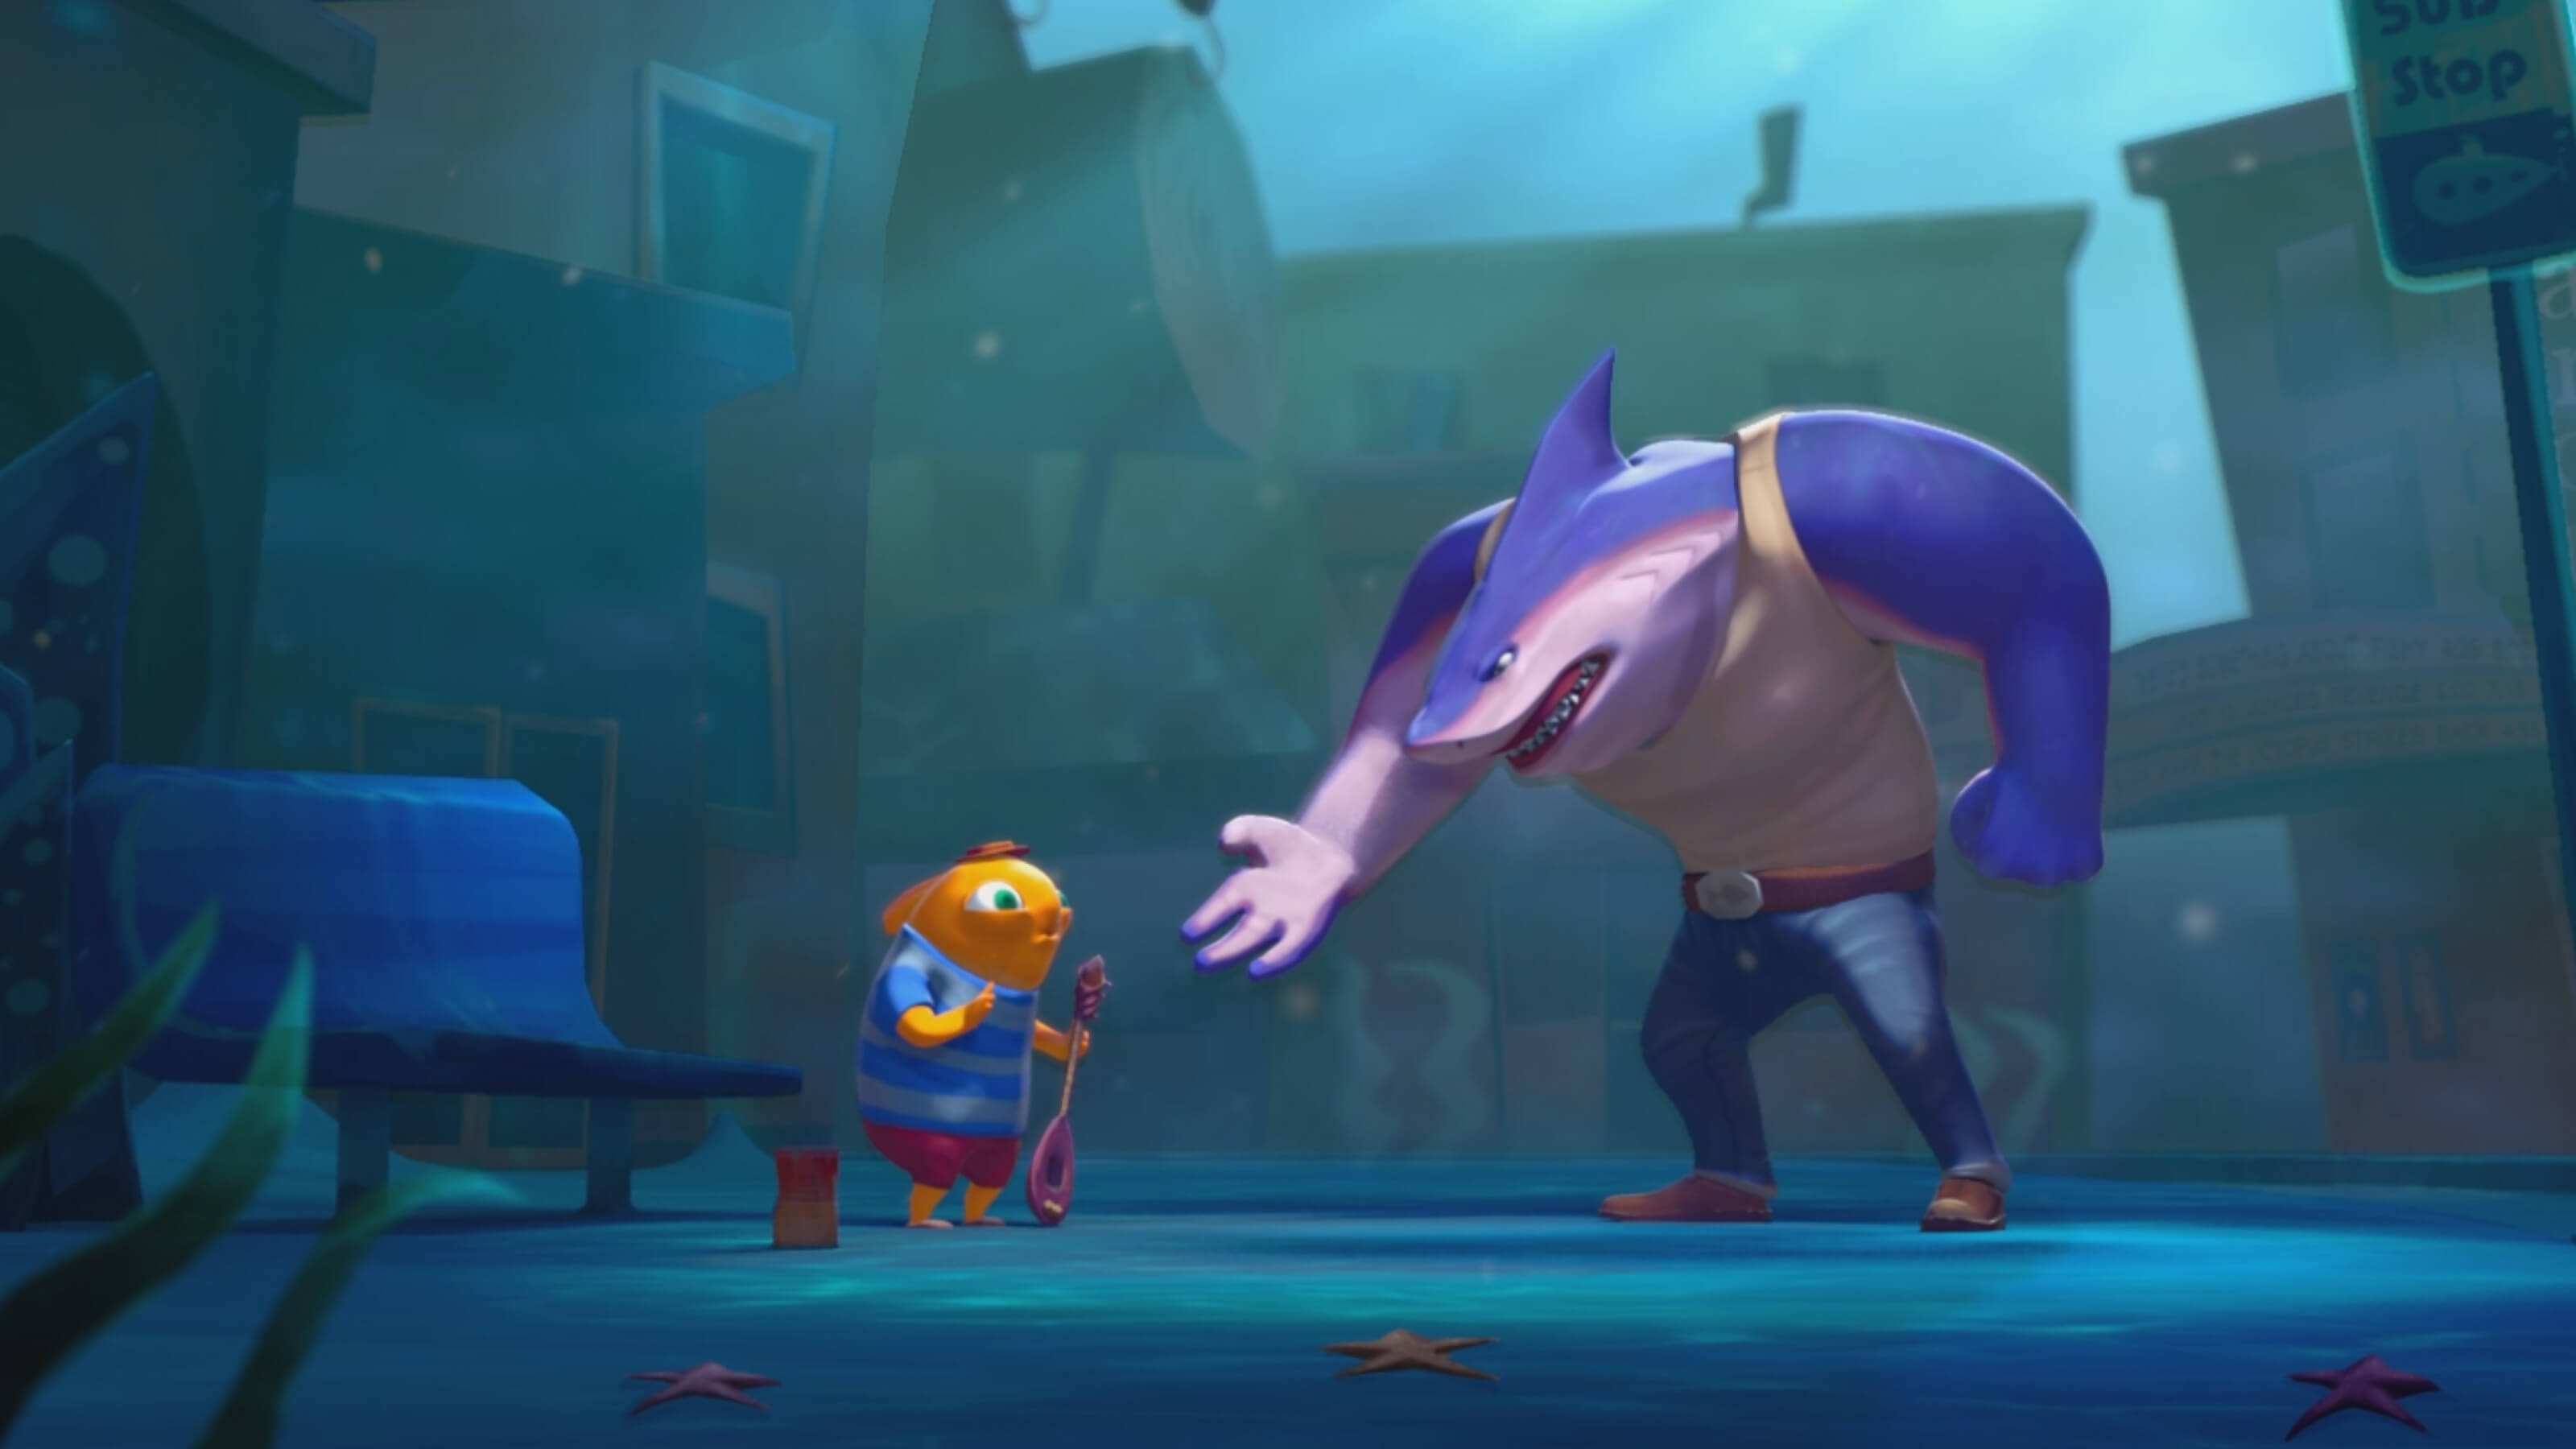 At a bus stop underwater, a large purple shark in jeans confronts a smaller orange fish in a striped t-shirt holding a banjo